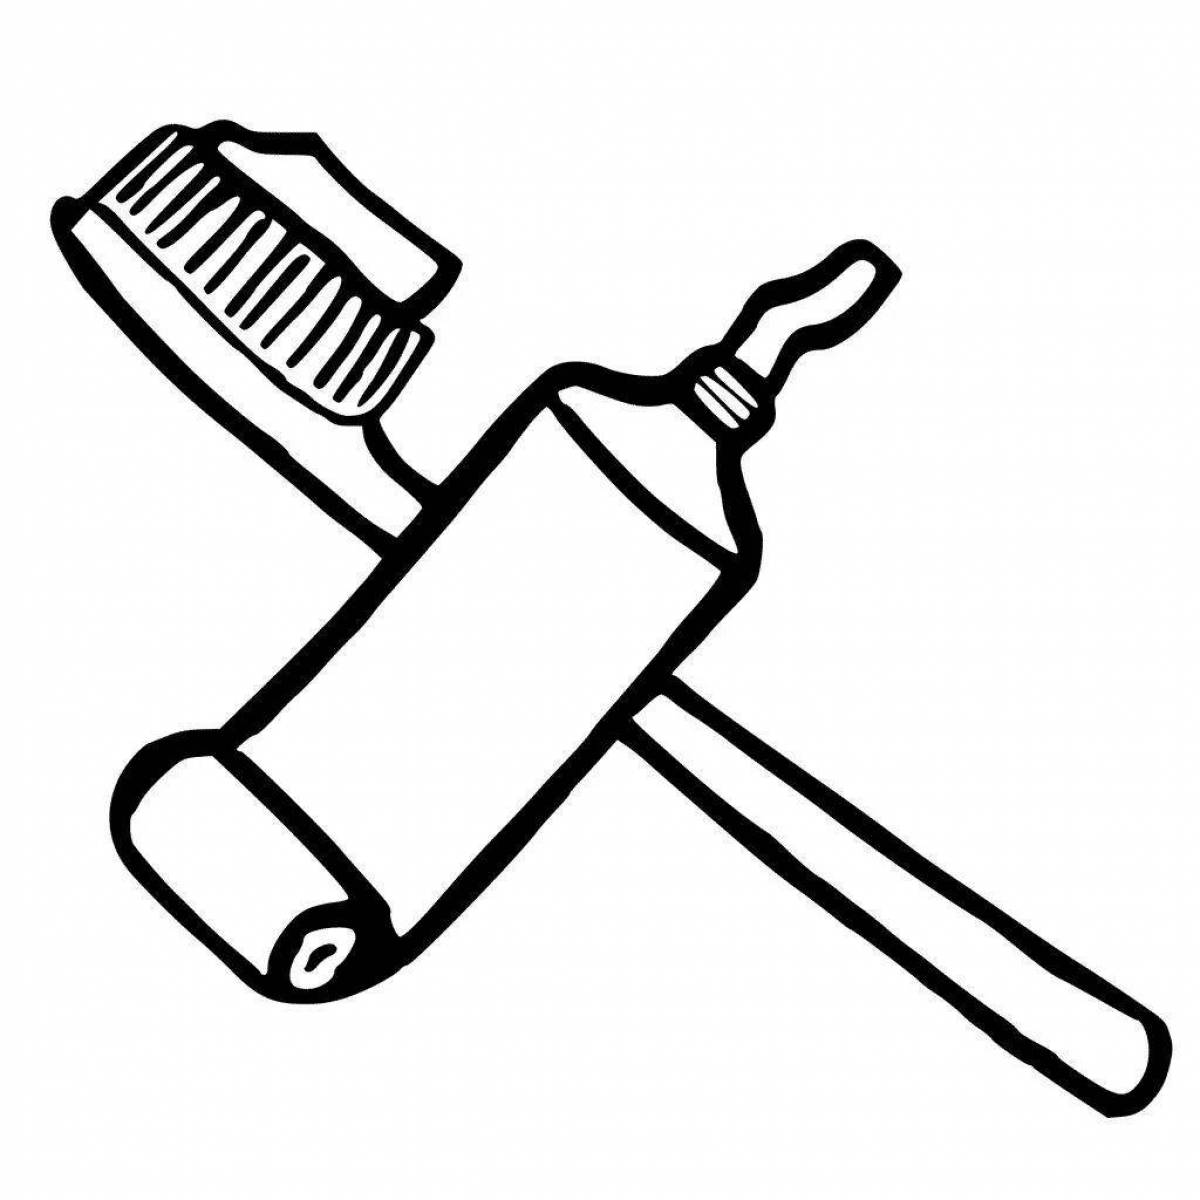 Playful hygiene products coloring page